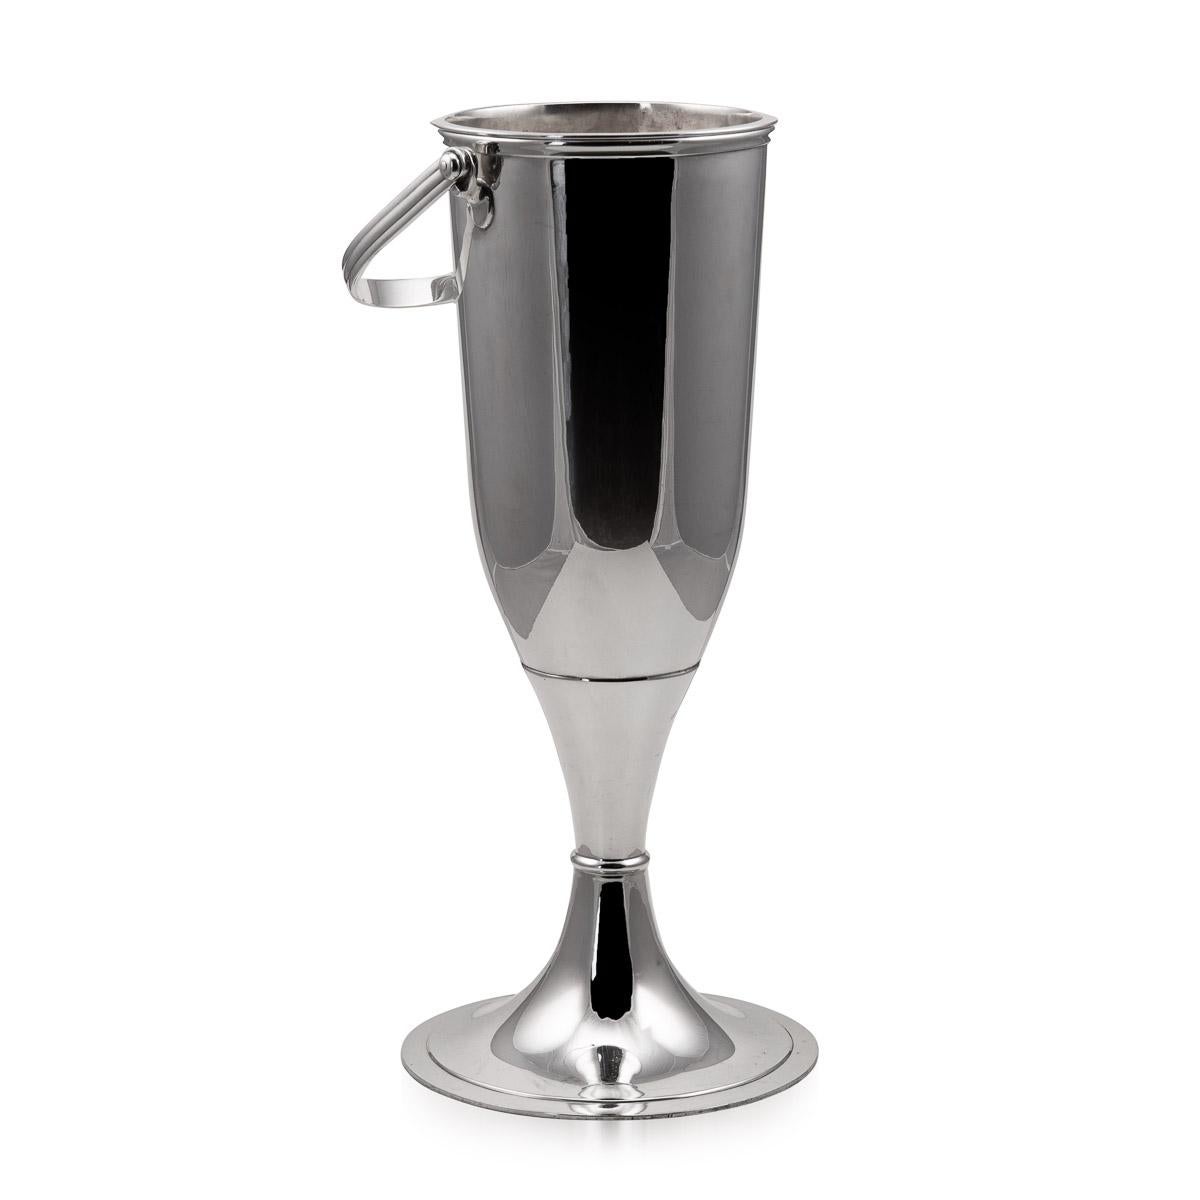 20th Century Art Deco silver plated wine cooler and stand. This set is as relevant today as it was then, it makes a fantastic statement piece and wonderful as part of a collection of barware in the modern home.

Conditions
In Great Condition - No